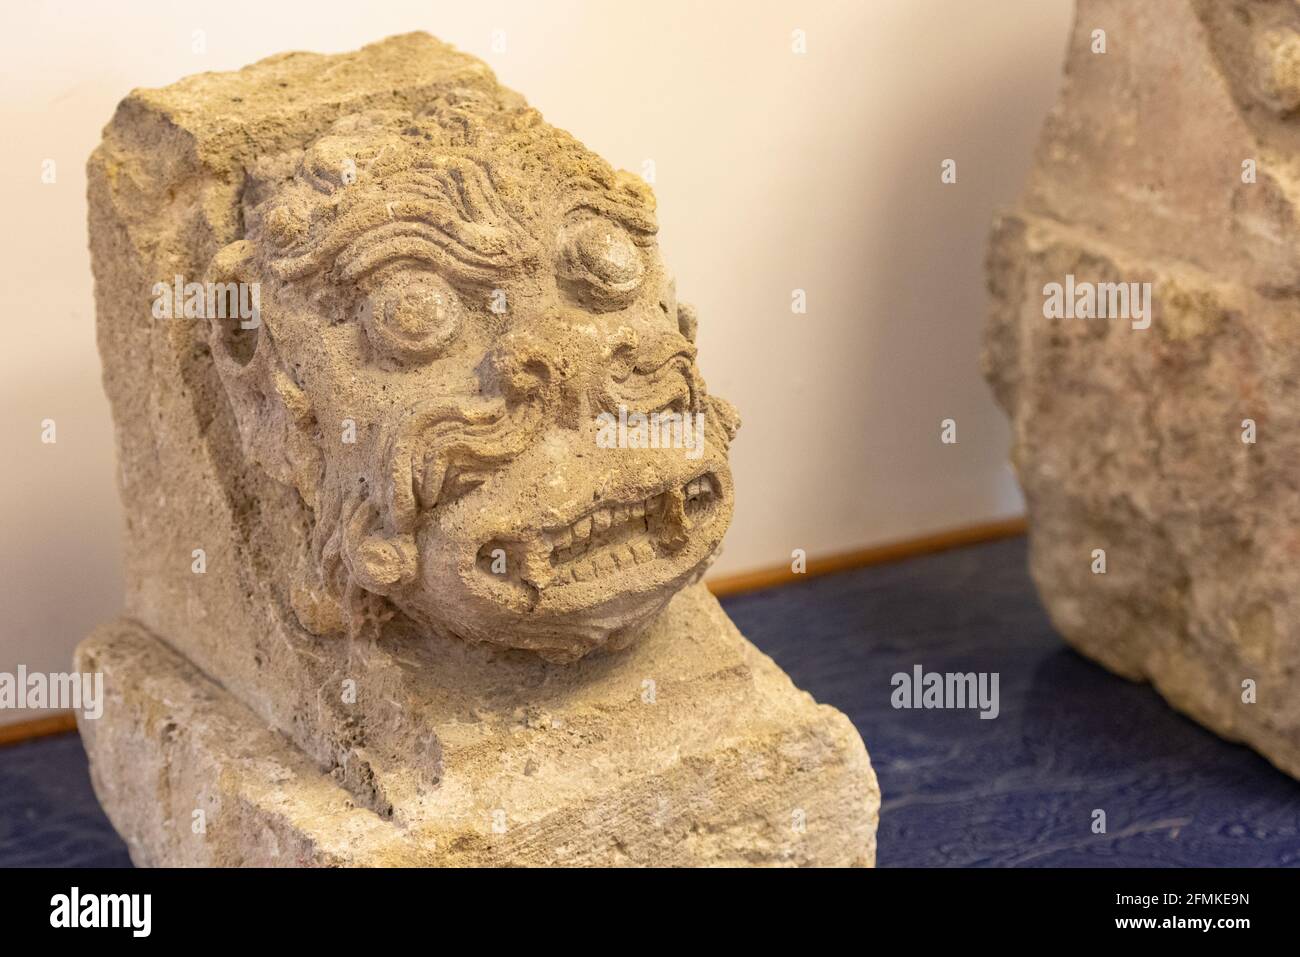 The head of the statue from the facade of the building. A free-standing, well-preserved monster's head from the eaves of an old house. Stock Photo